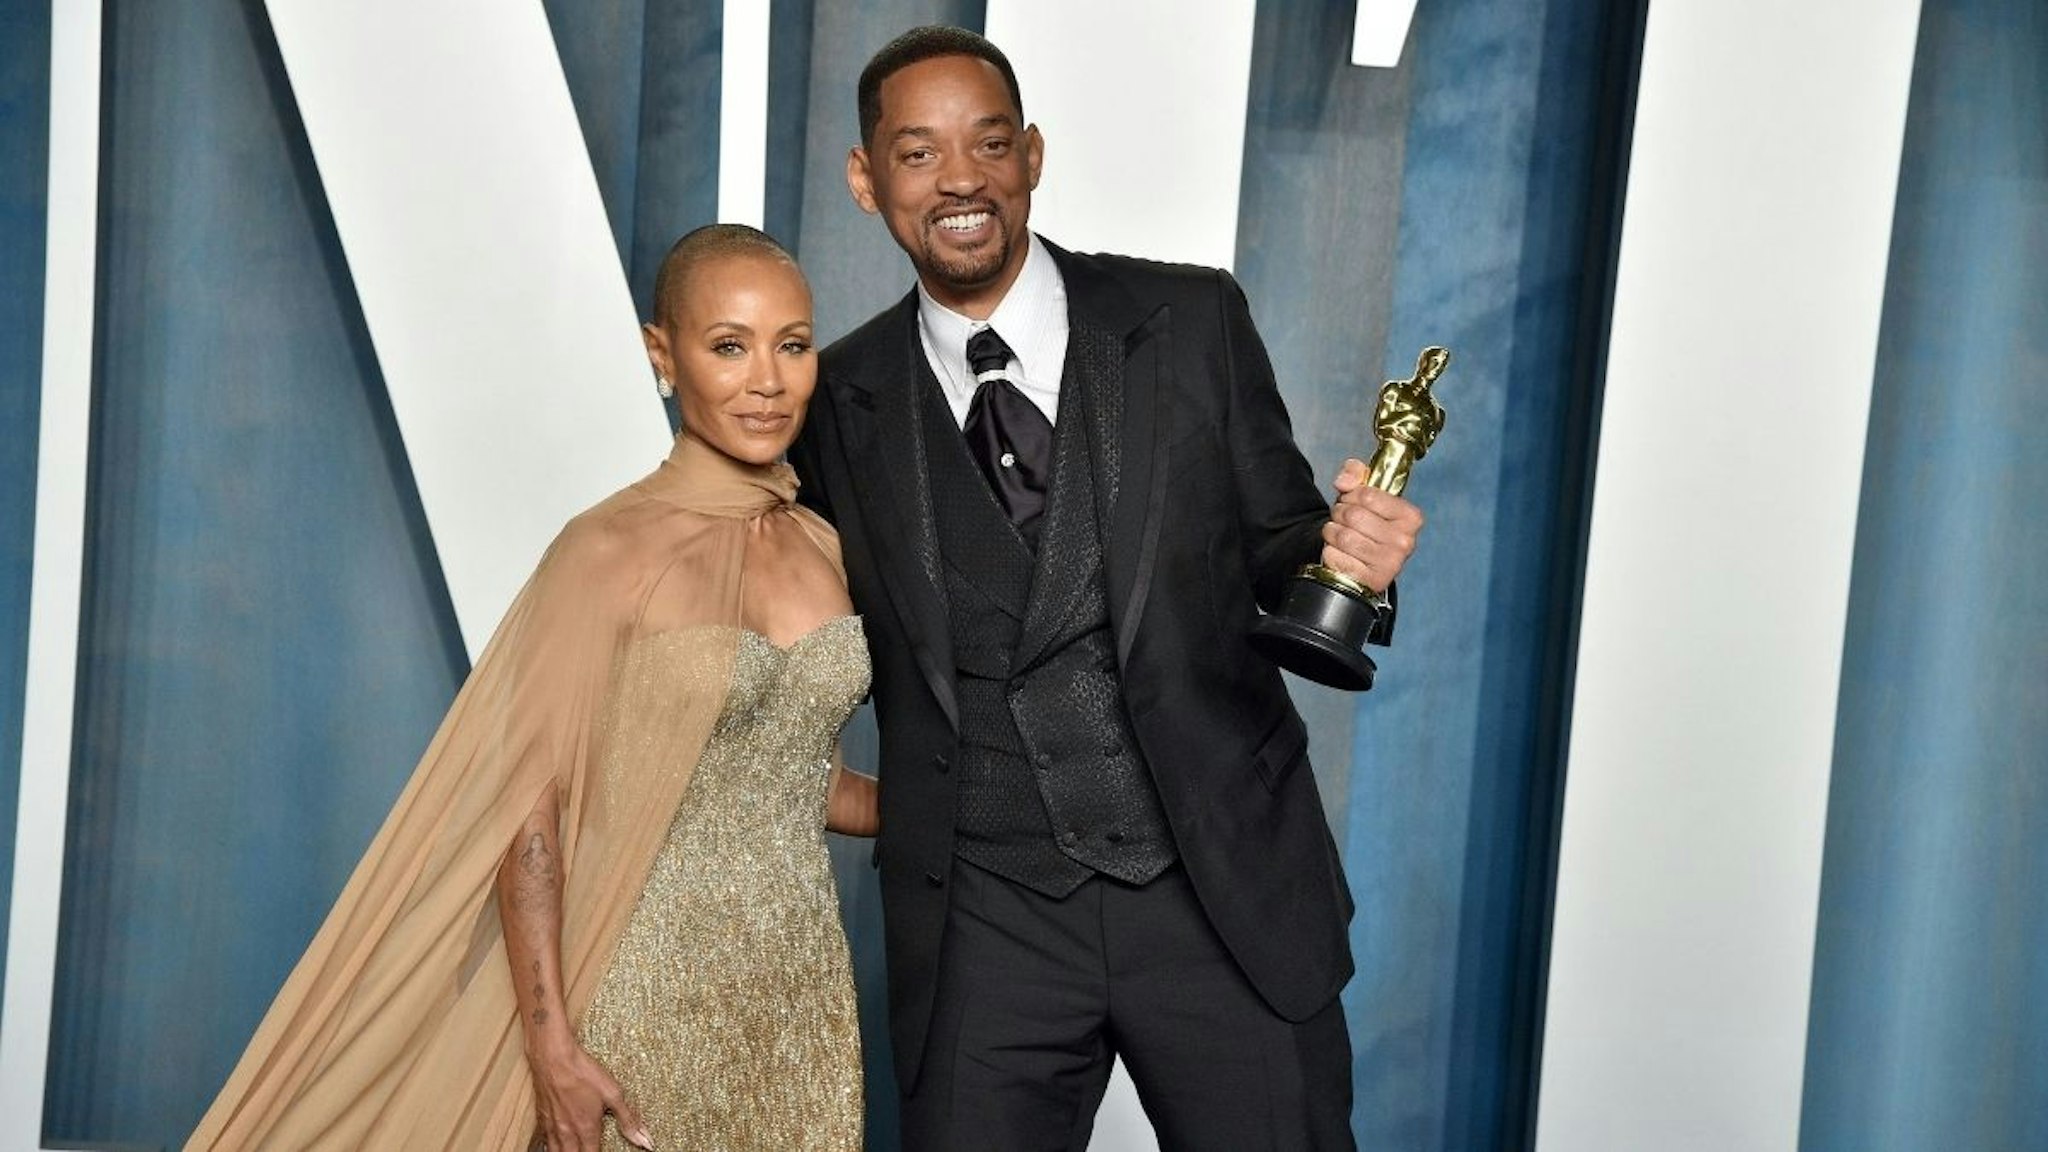 Will Smith and Jada Pinkett Smith attend the 2022 Vanity Fair Oscar Party hosted by Radhika Jones at Wallis Annenberg Center for the Performing Arts on March 27, 2022 in Beverly Hills, California.